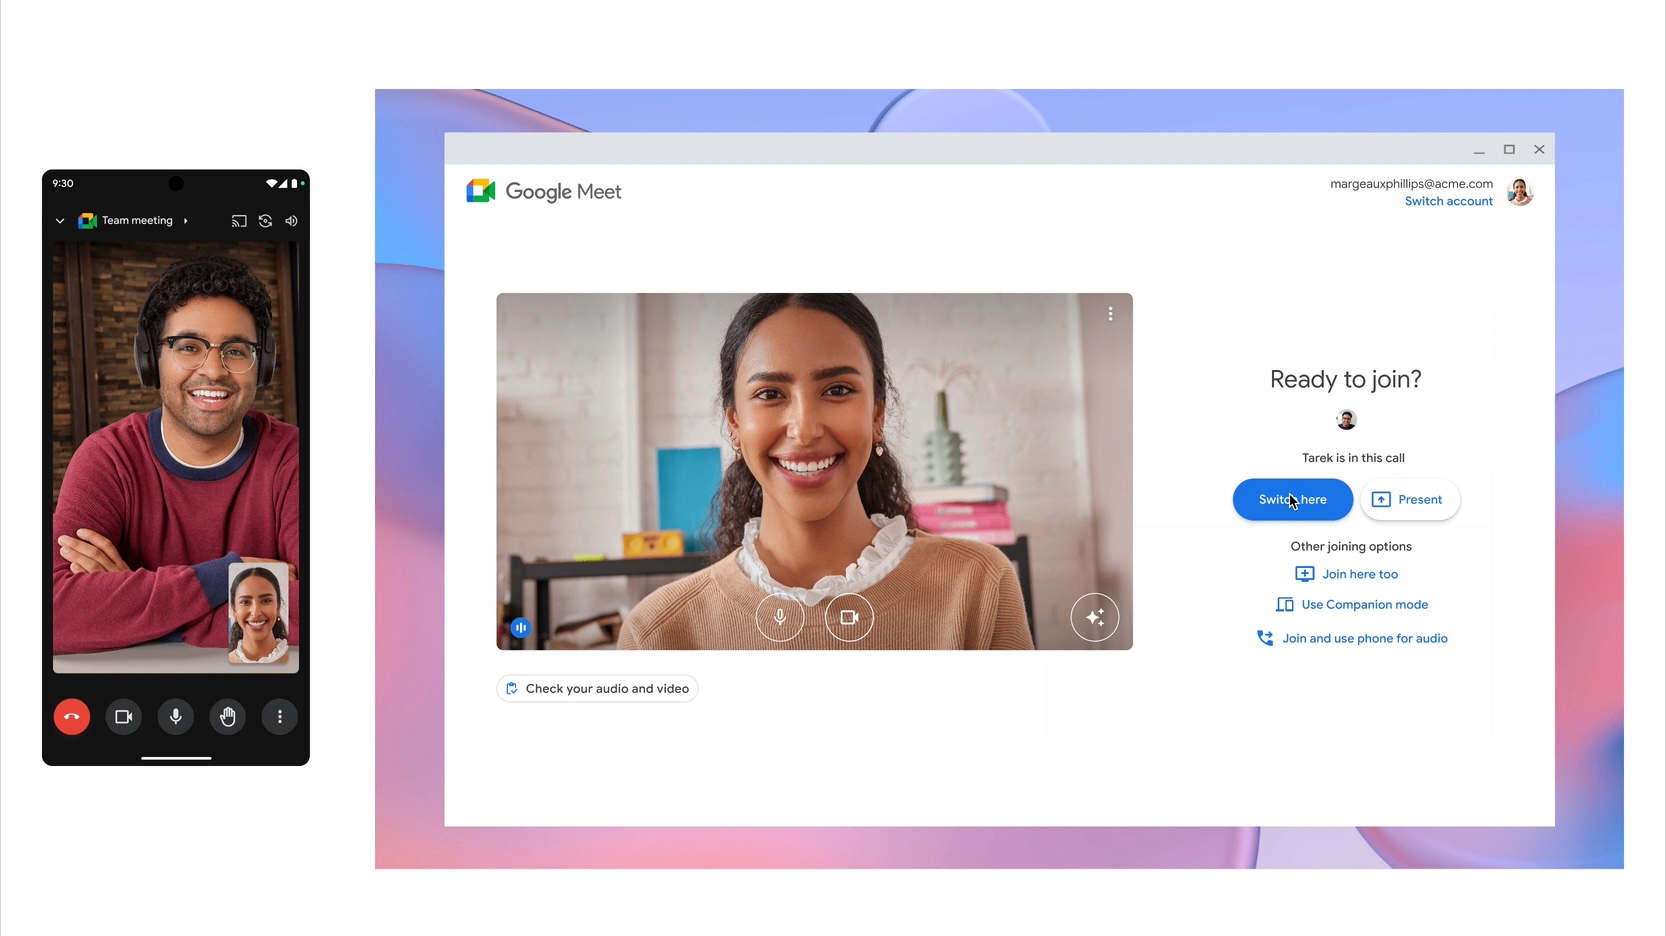 New Google Meet feature lets you switch devices seamlessly mid-call